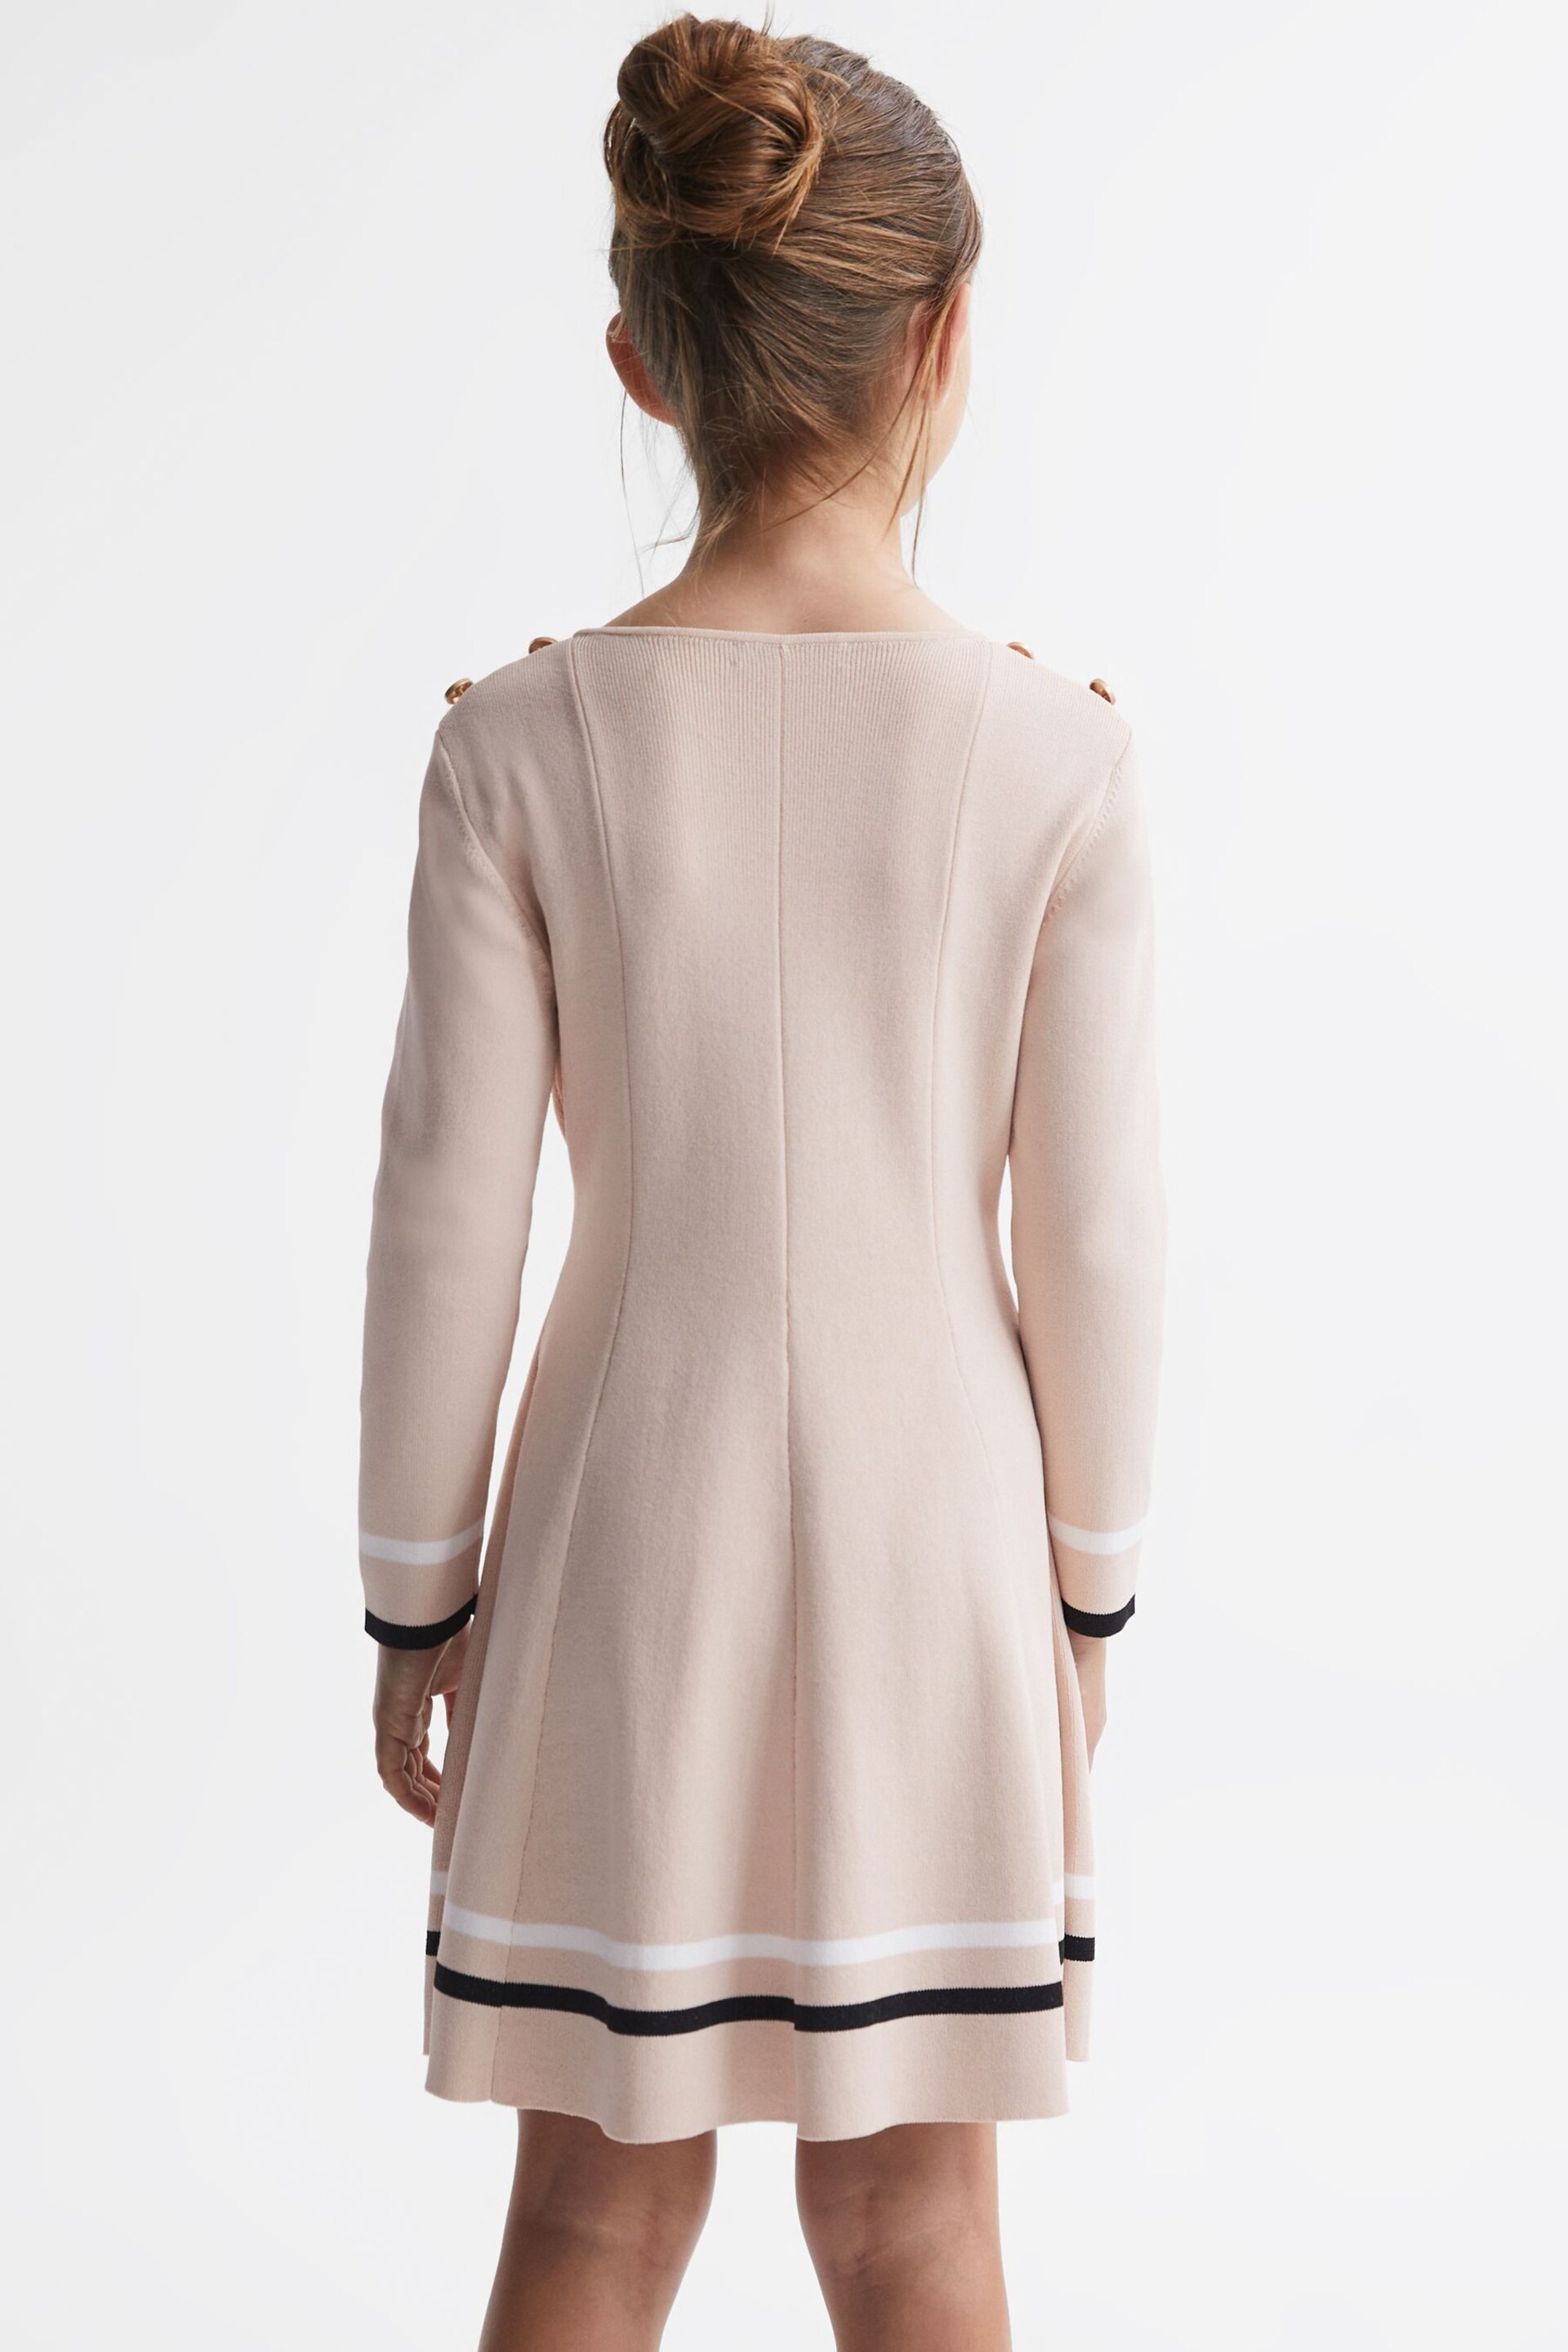 Reiss Pink Paige Junior Knitted Flared Dress - Image 4 of 5